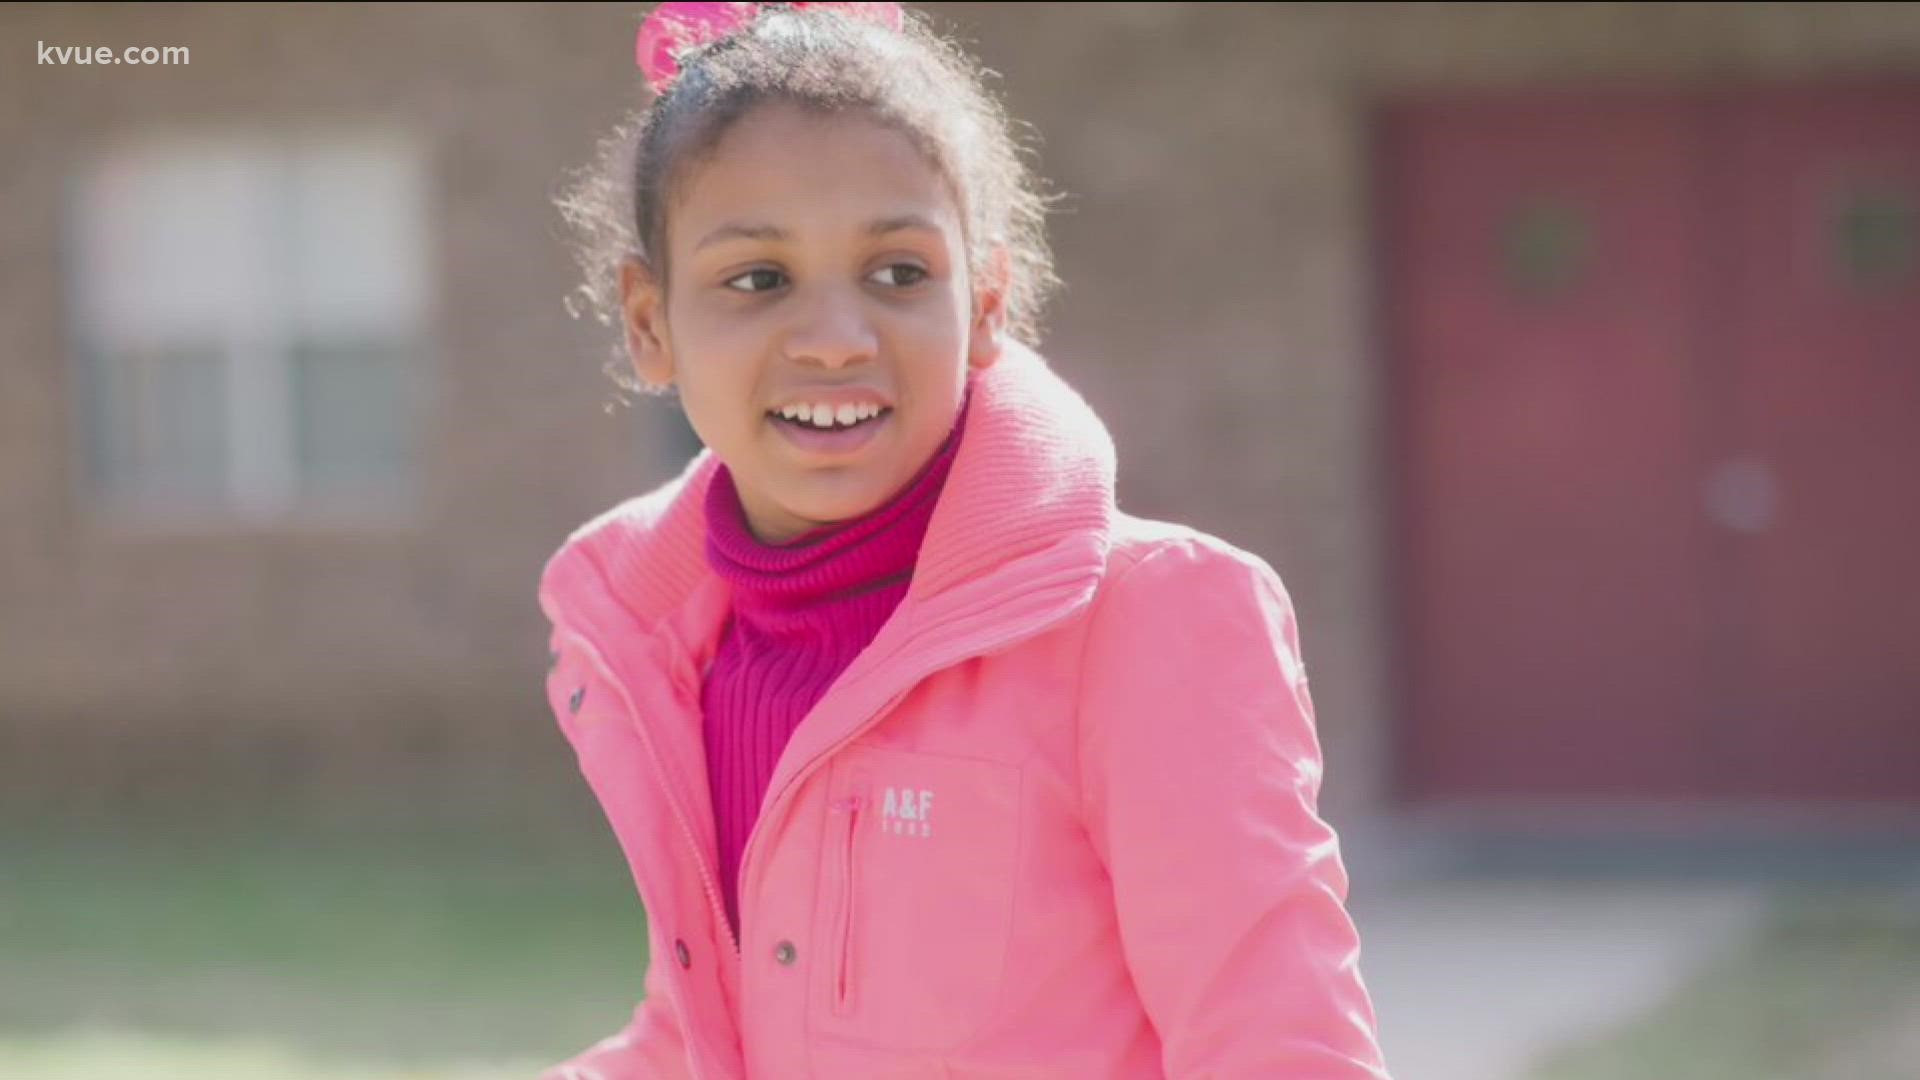 Every day, more than 1,000 kids in Central Texas wait and hope for a family to call their own. This week, we're introducing you to an energetic young girl named Lisa